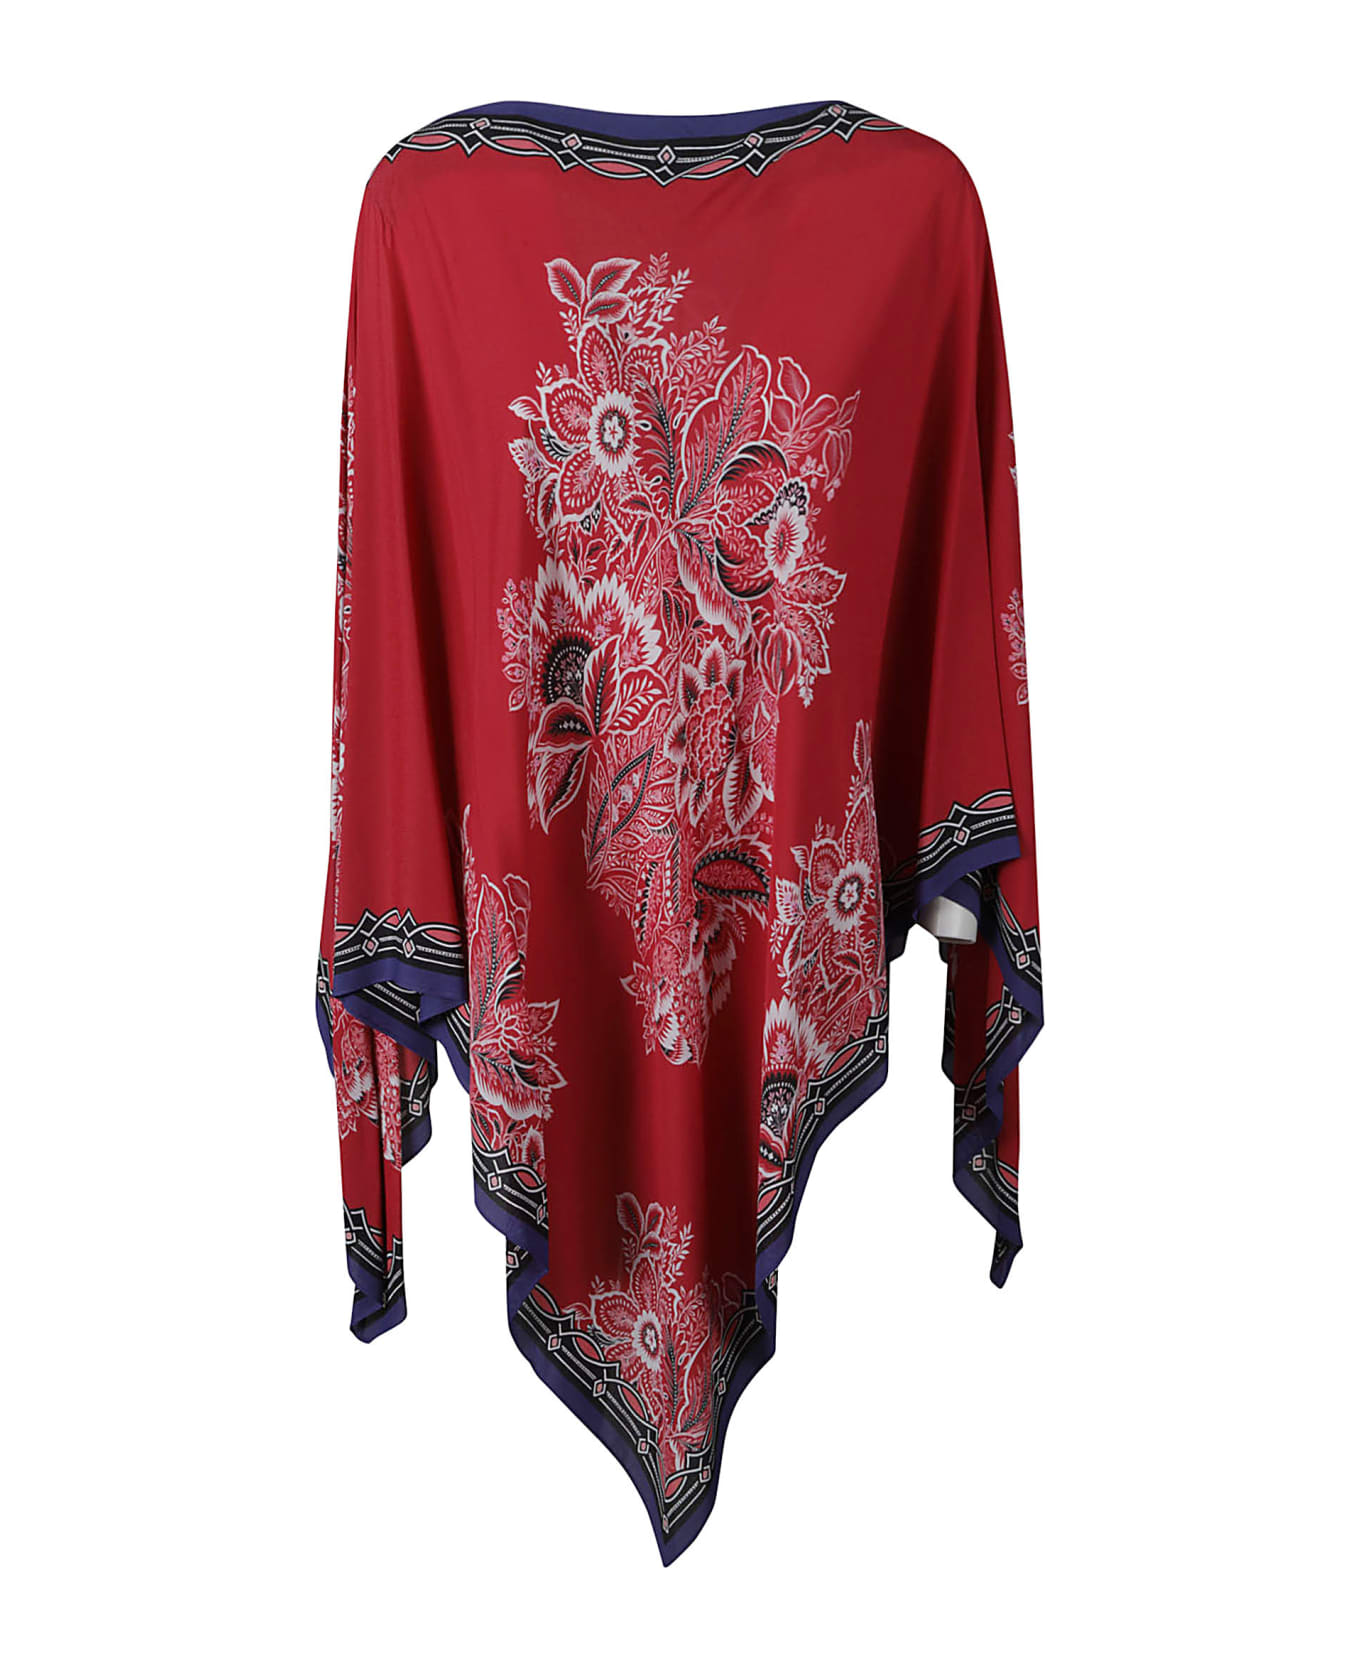 Etro Floral Printed Asymmetric Dress - Red/Multicolor